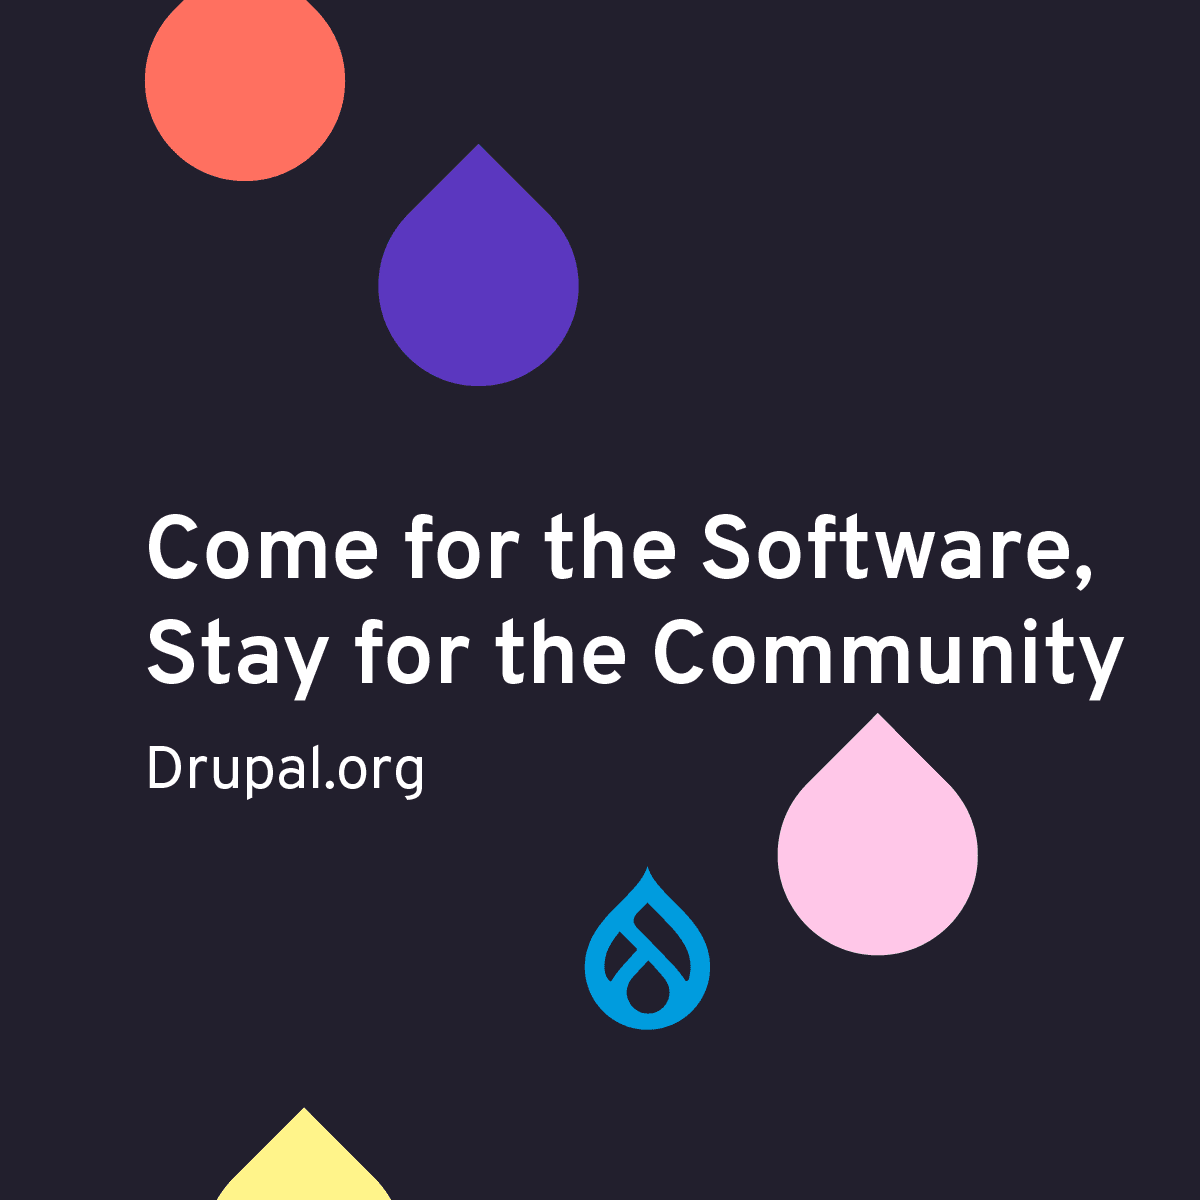 Came for the Software, Stay for the Community - text